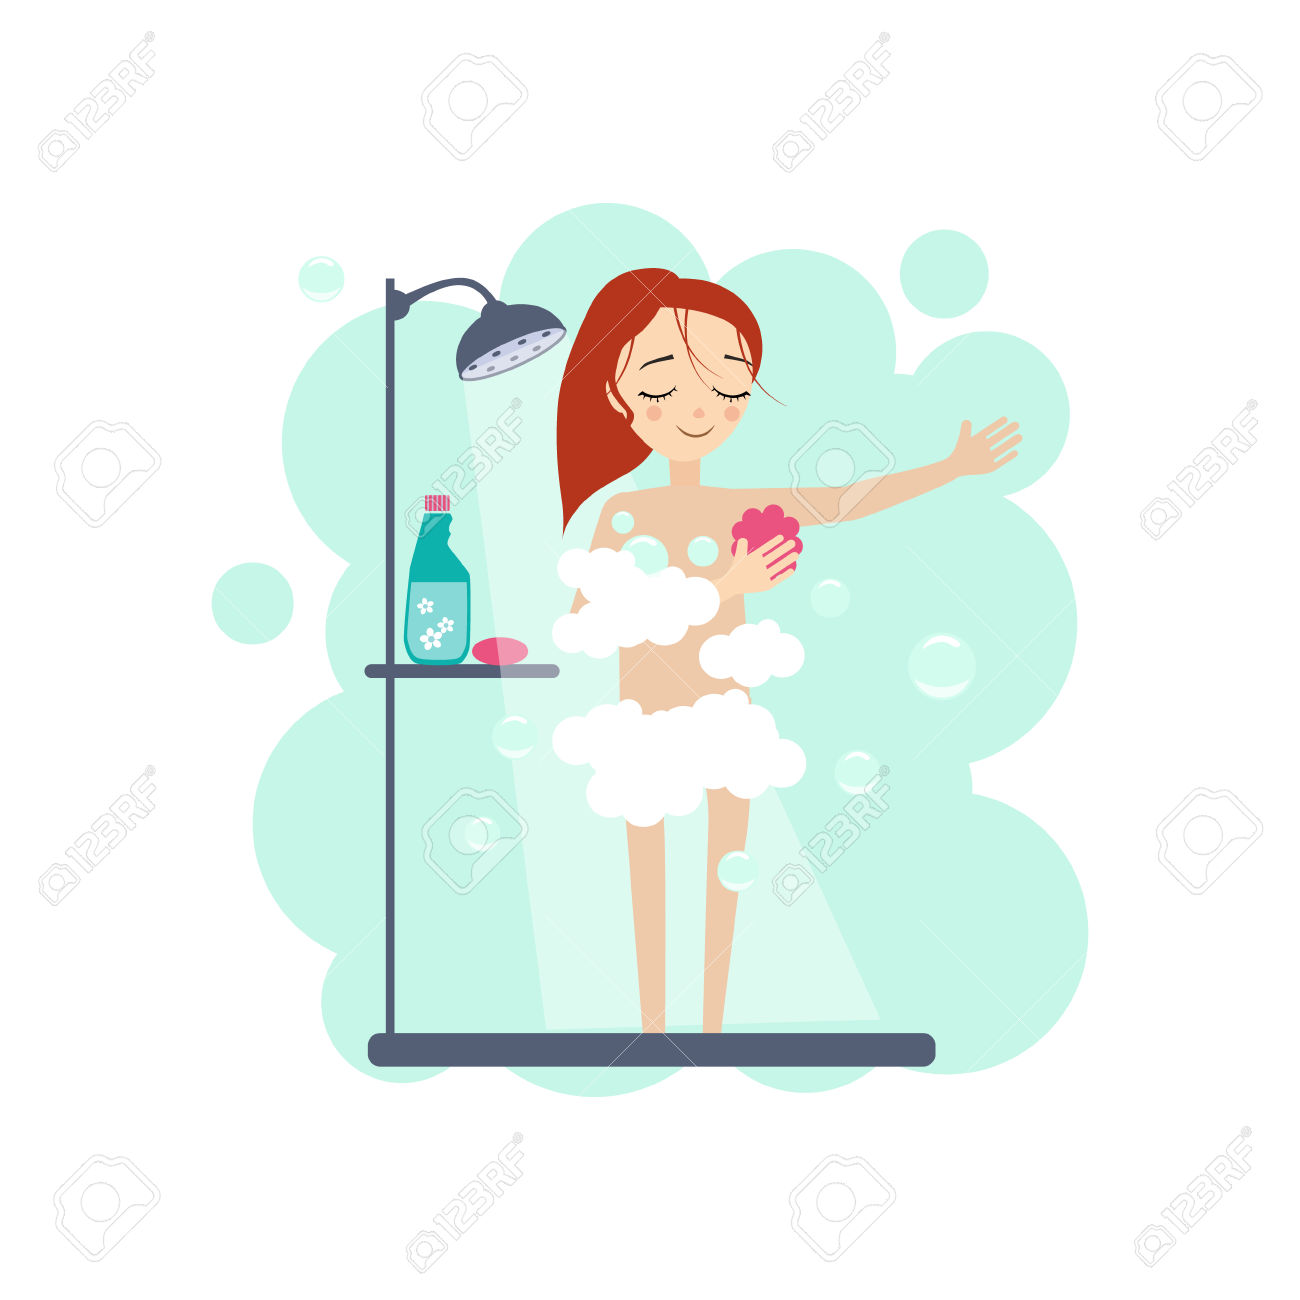 Taking A Shower. Daily Routine Activities Of Women. Colourful.